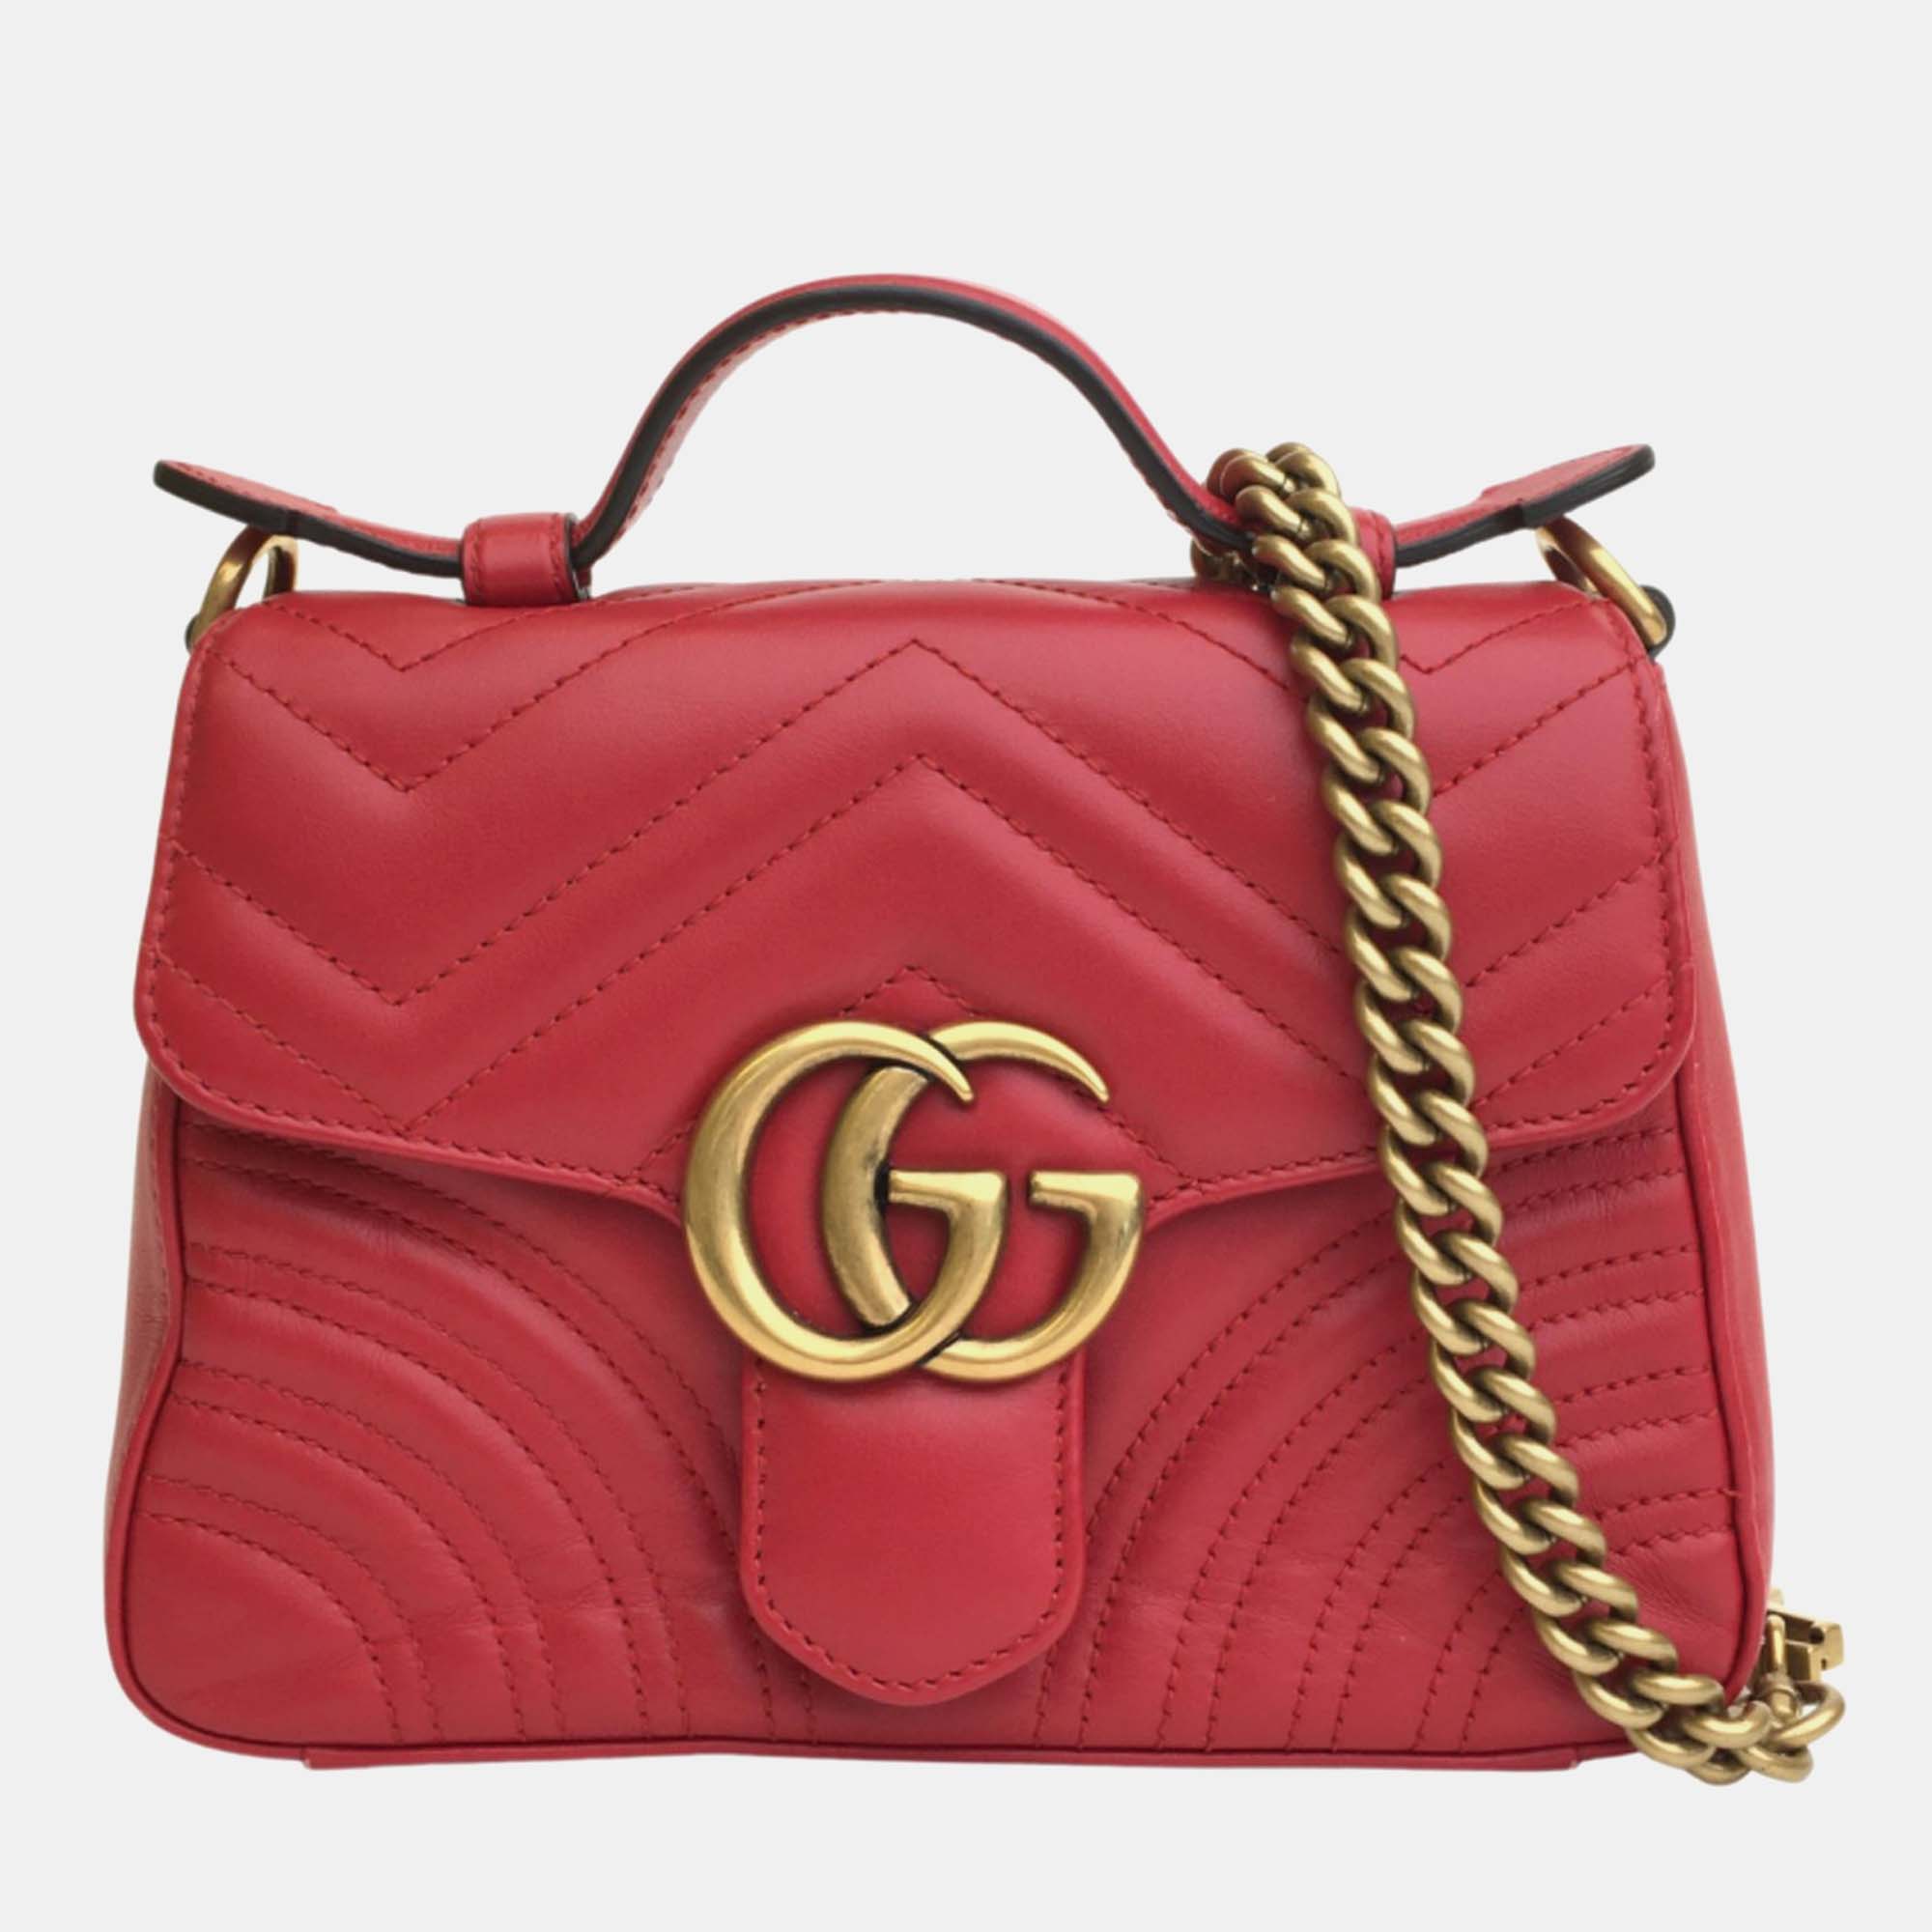 Gucci red leather mini gg marmont bag